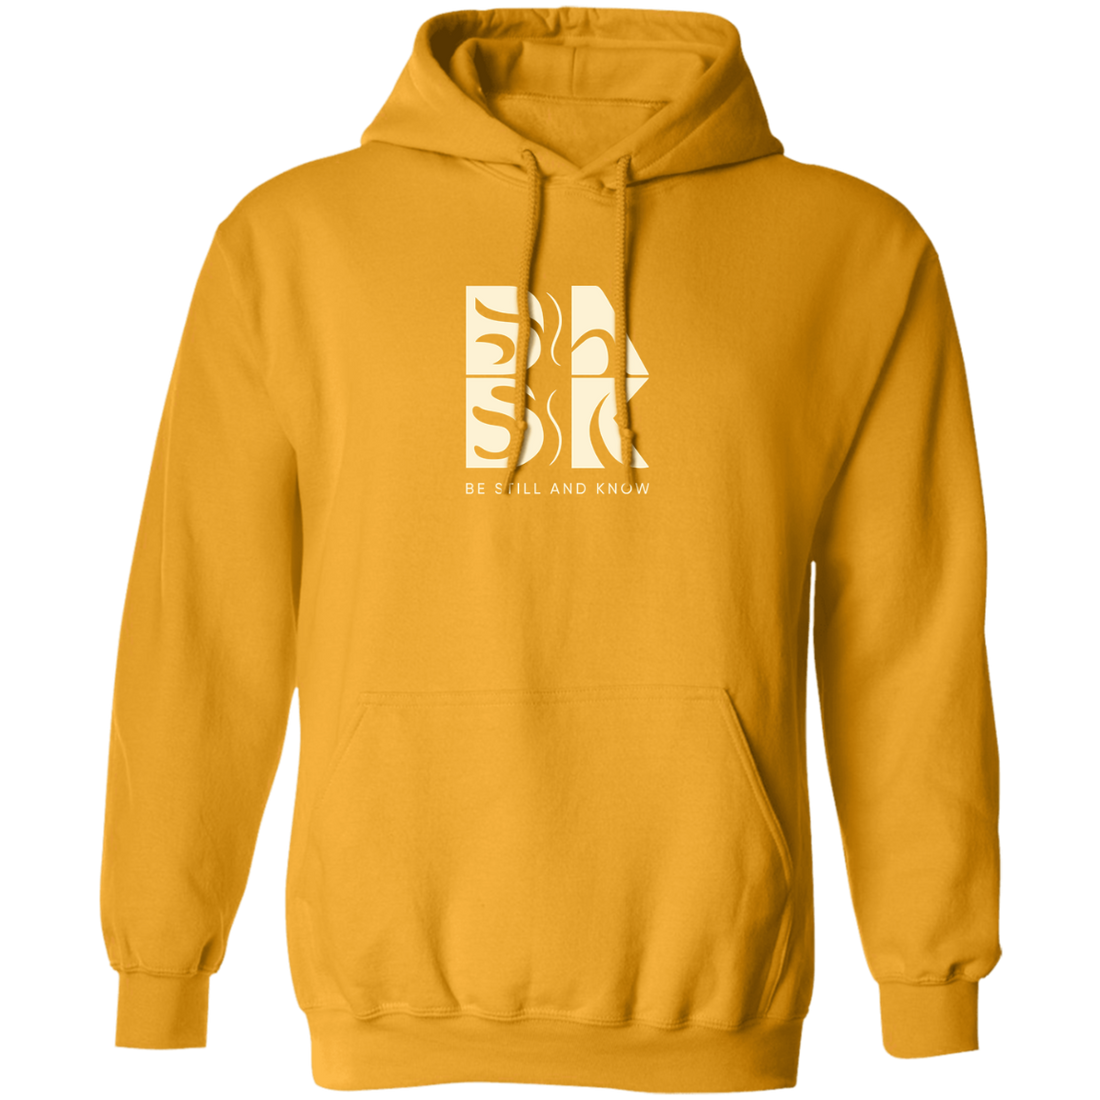 A Be Still and Know Golden Coast In Hoodie in Gold featuring the BSAK logo on a yellow background.